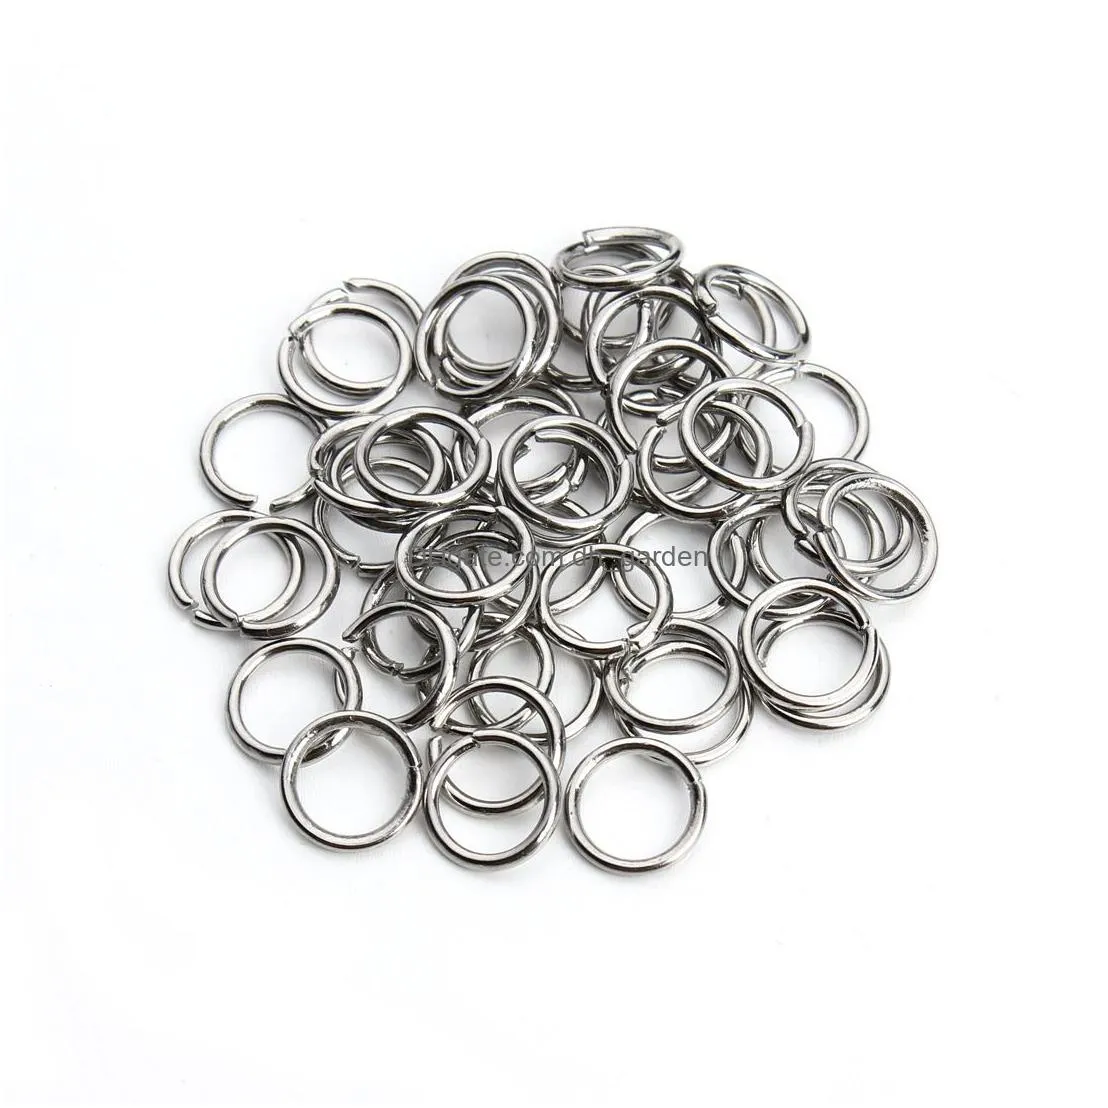 High quality Stainless Steel Open Closed Connecting Ring Charm for Diy Bracelet Keychain Simple Round Ring Diy Jewelry Making